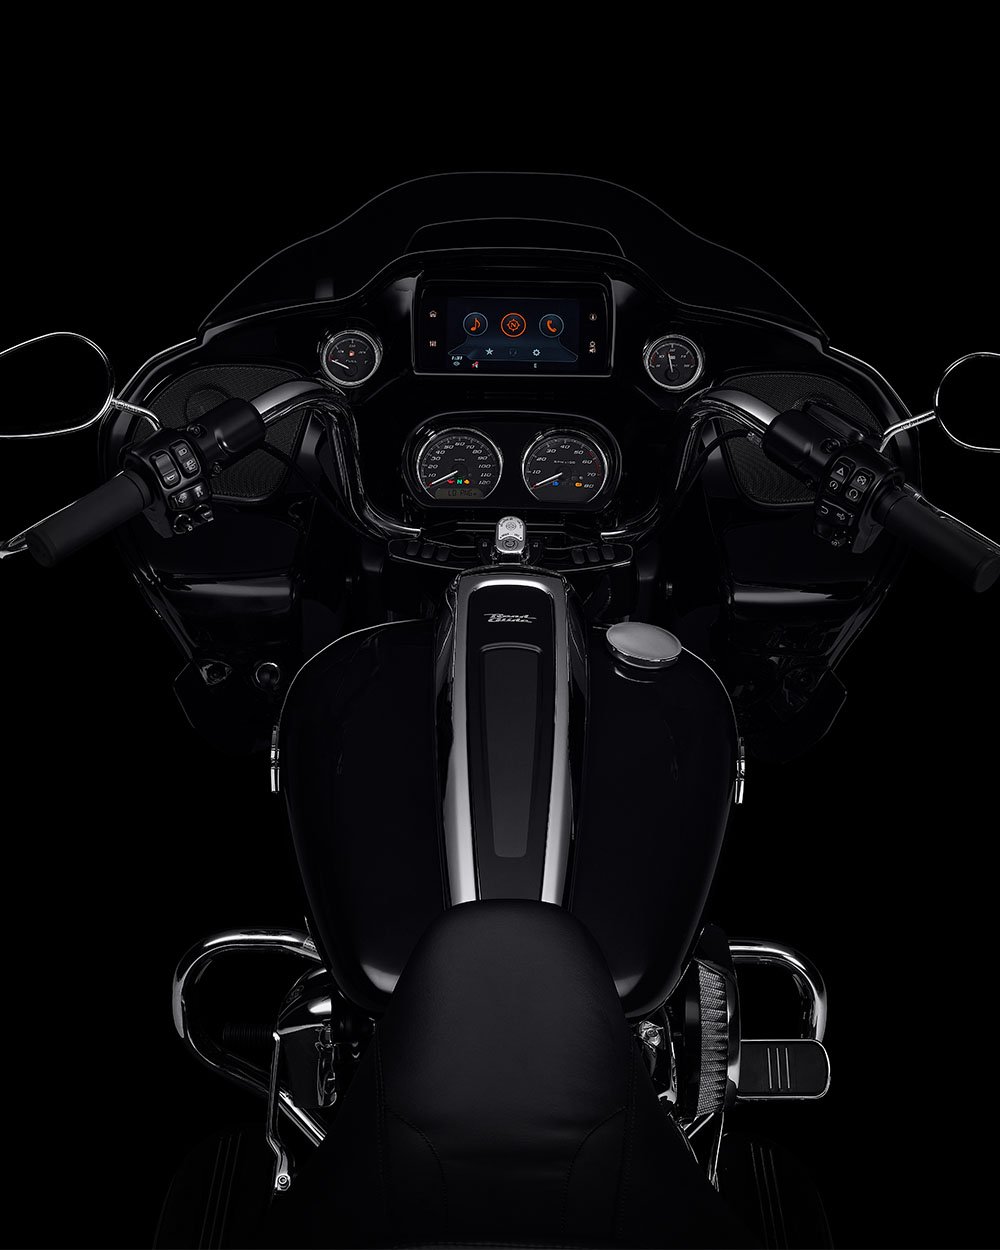 Boom Box Infotainment System on a 2022 Road Glide Special